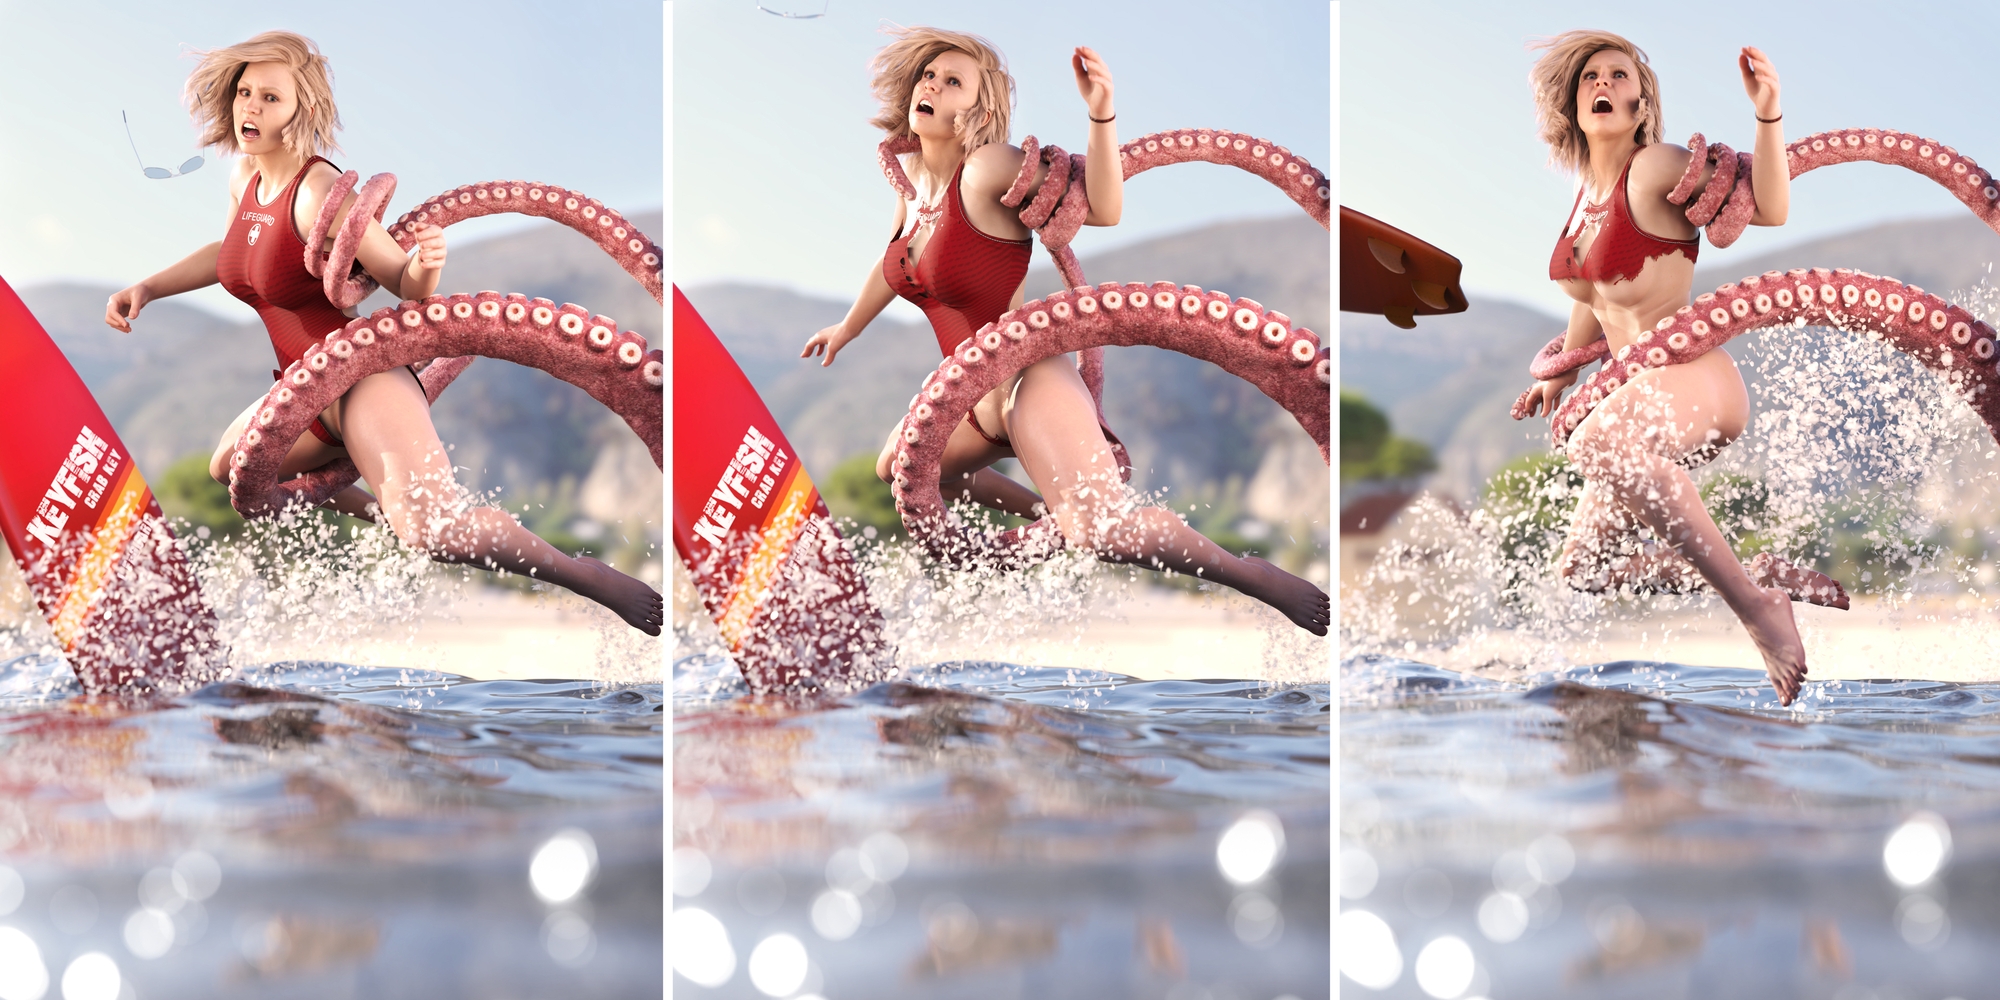 Mary the lifeguard : Octopus attack! Lifeguard Hentai Tentacles Tentacle Sexy Suit Sexy Swimsuit Sexy Woman Sexy Blonde 2